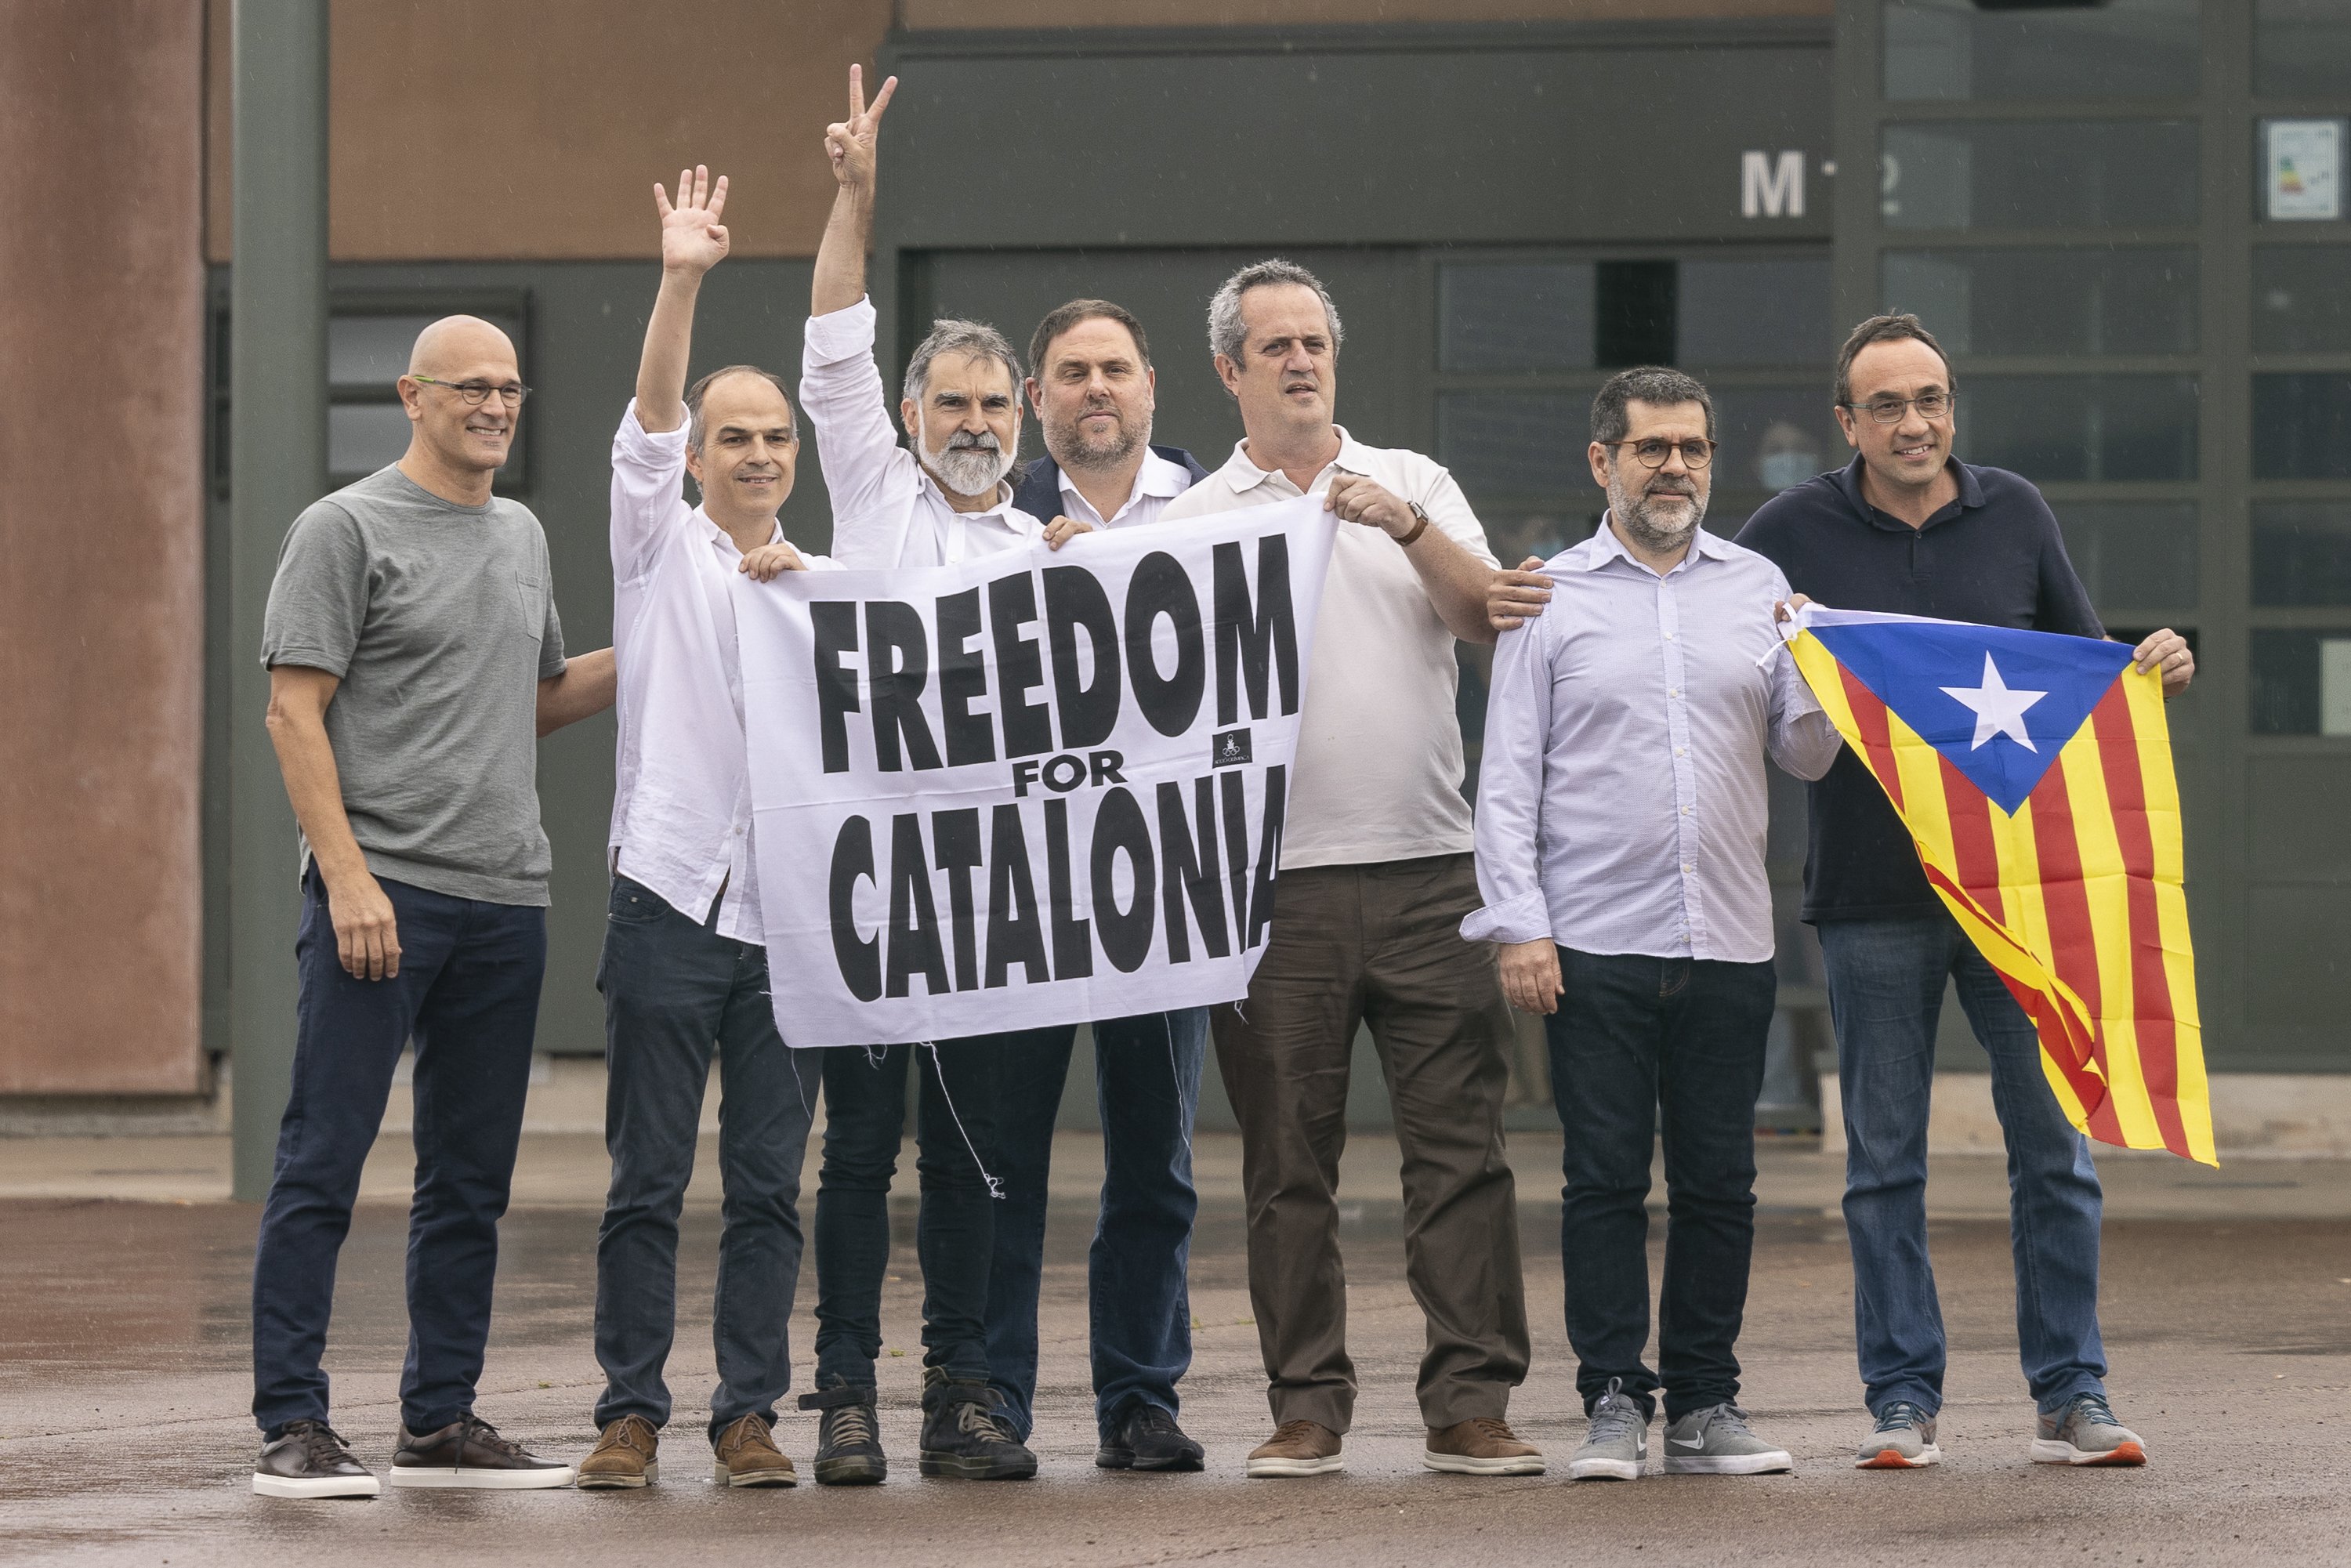 Spain responds to UN questions by boasting of dialogue table and casting ERC as jailer